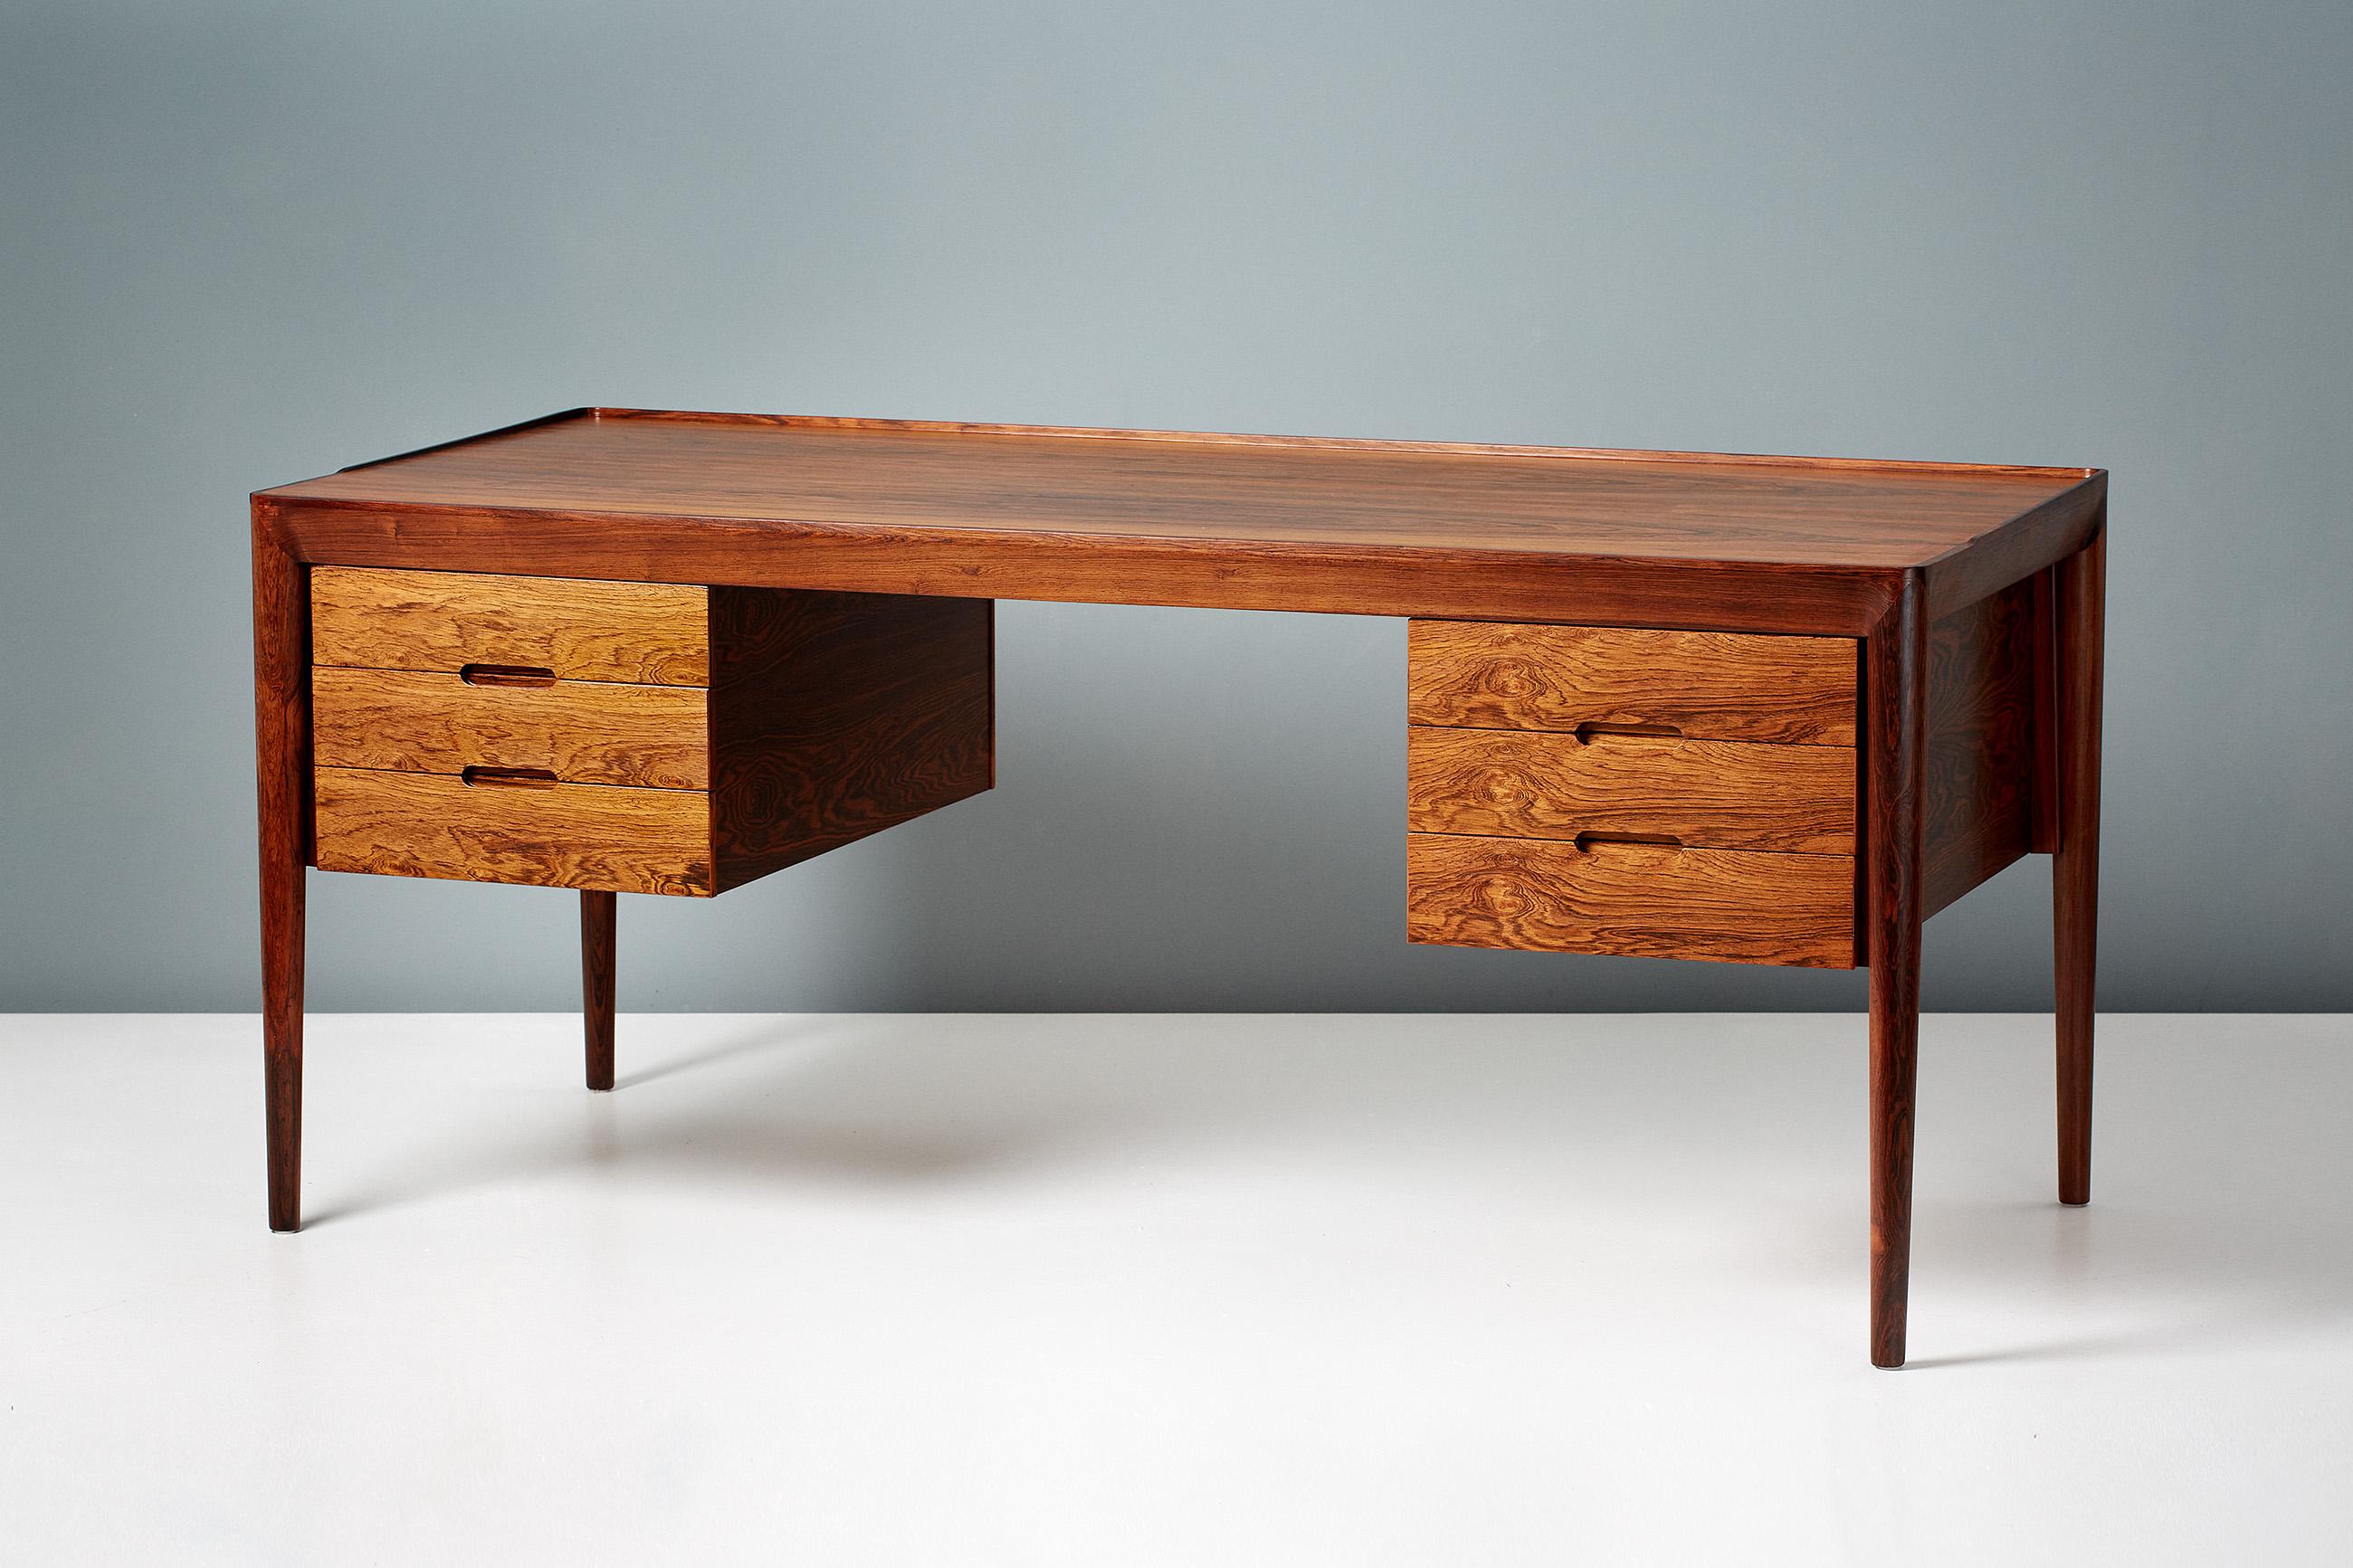 Erik Riisager Hansen writing desk, produced by Haslev Mobelsnedkeri in Haslev, Denmark, circa 1950s. The top is rosewood veneer with solid rosewood legs and mouldings. Each side has a 3-drawer carcass with pullout / pull-out trays.

Measures: H